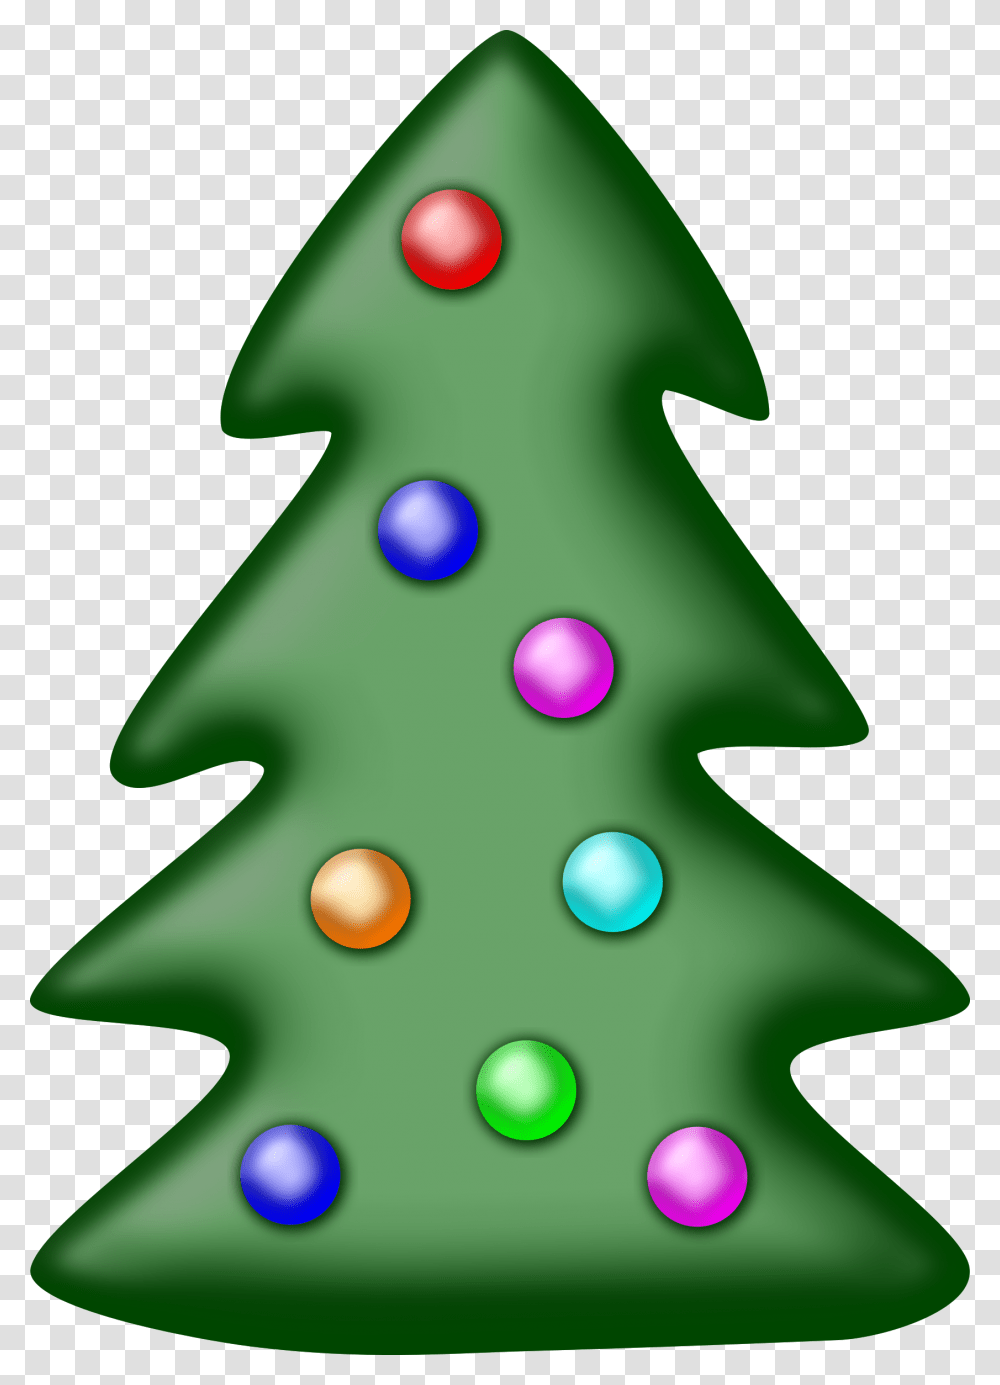 Christmas Tree Christmas Tree Icon Facebook Photo Ideas, Plant, Ornament, Toy, Star Symbol Transparent Png